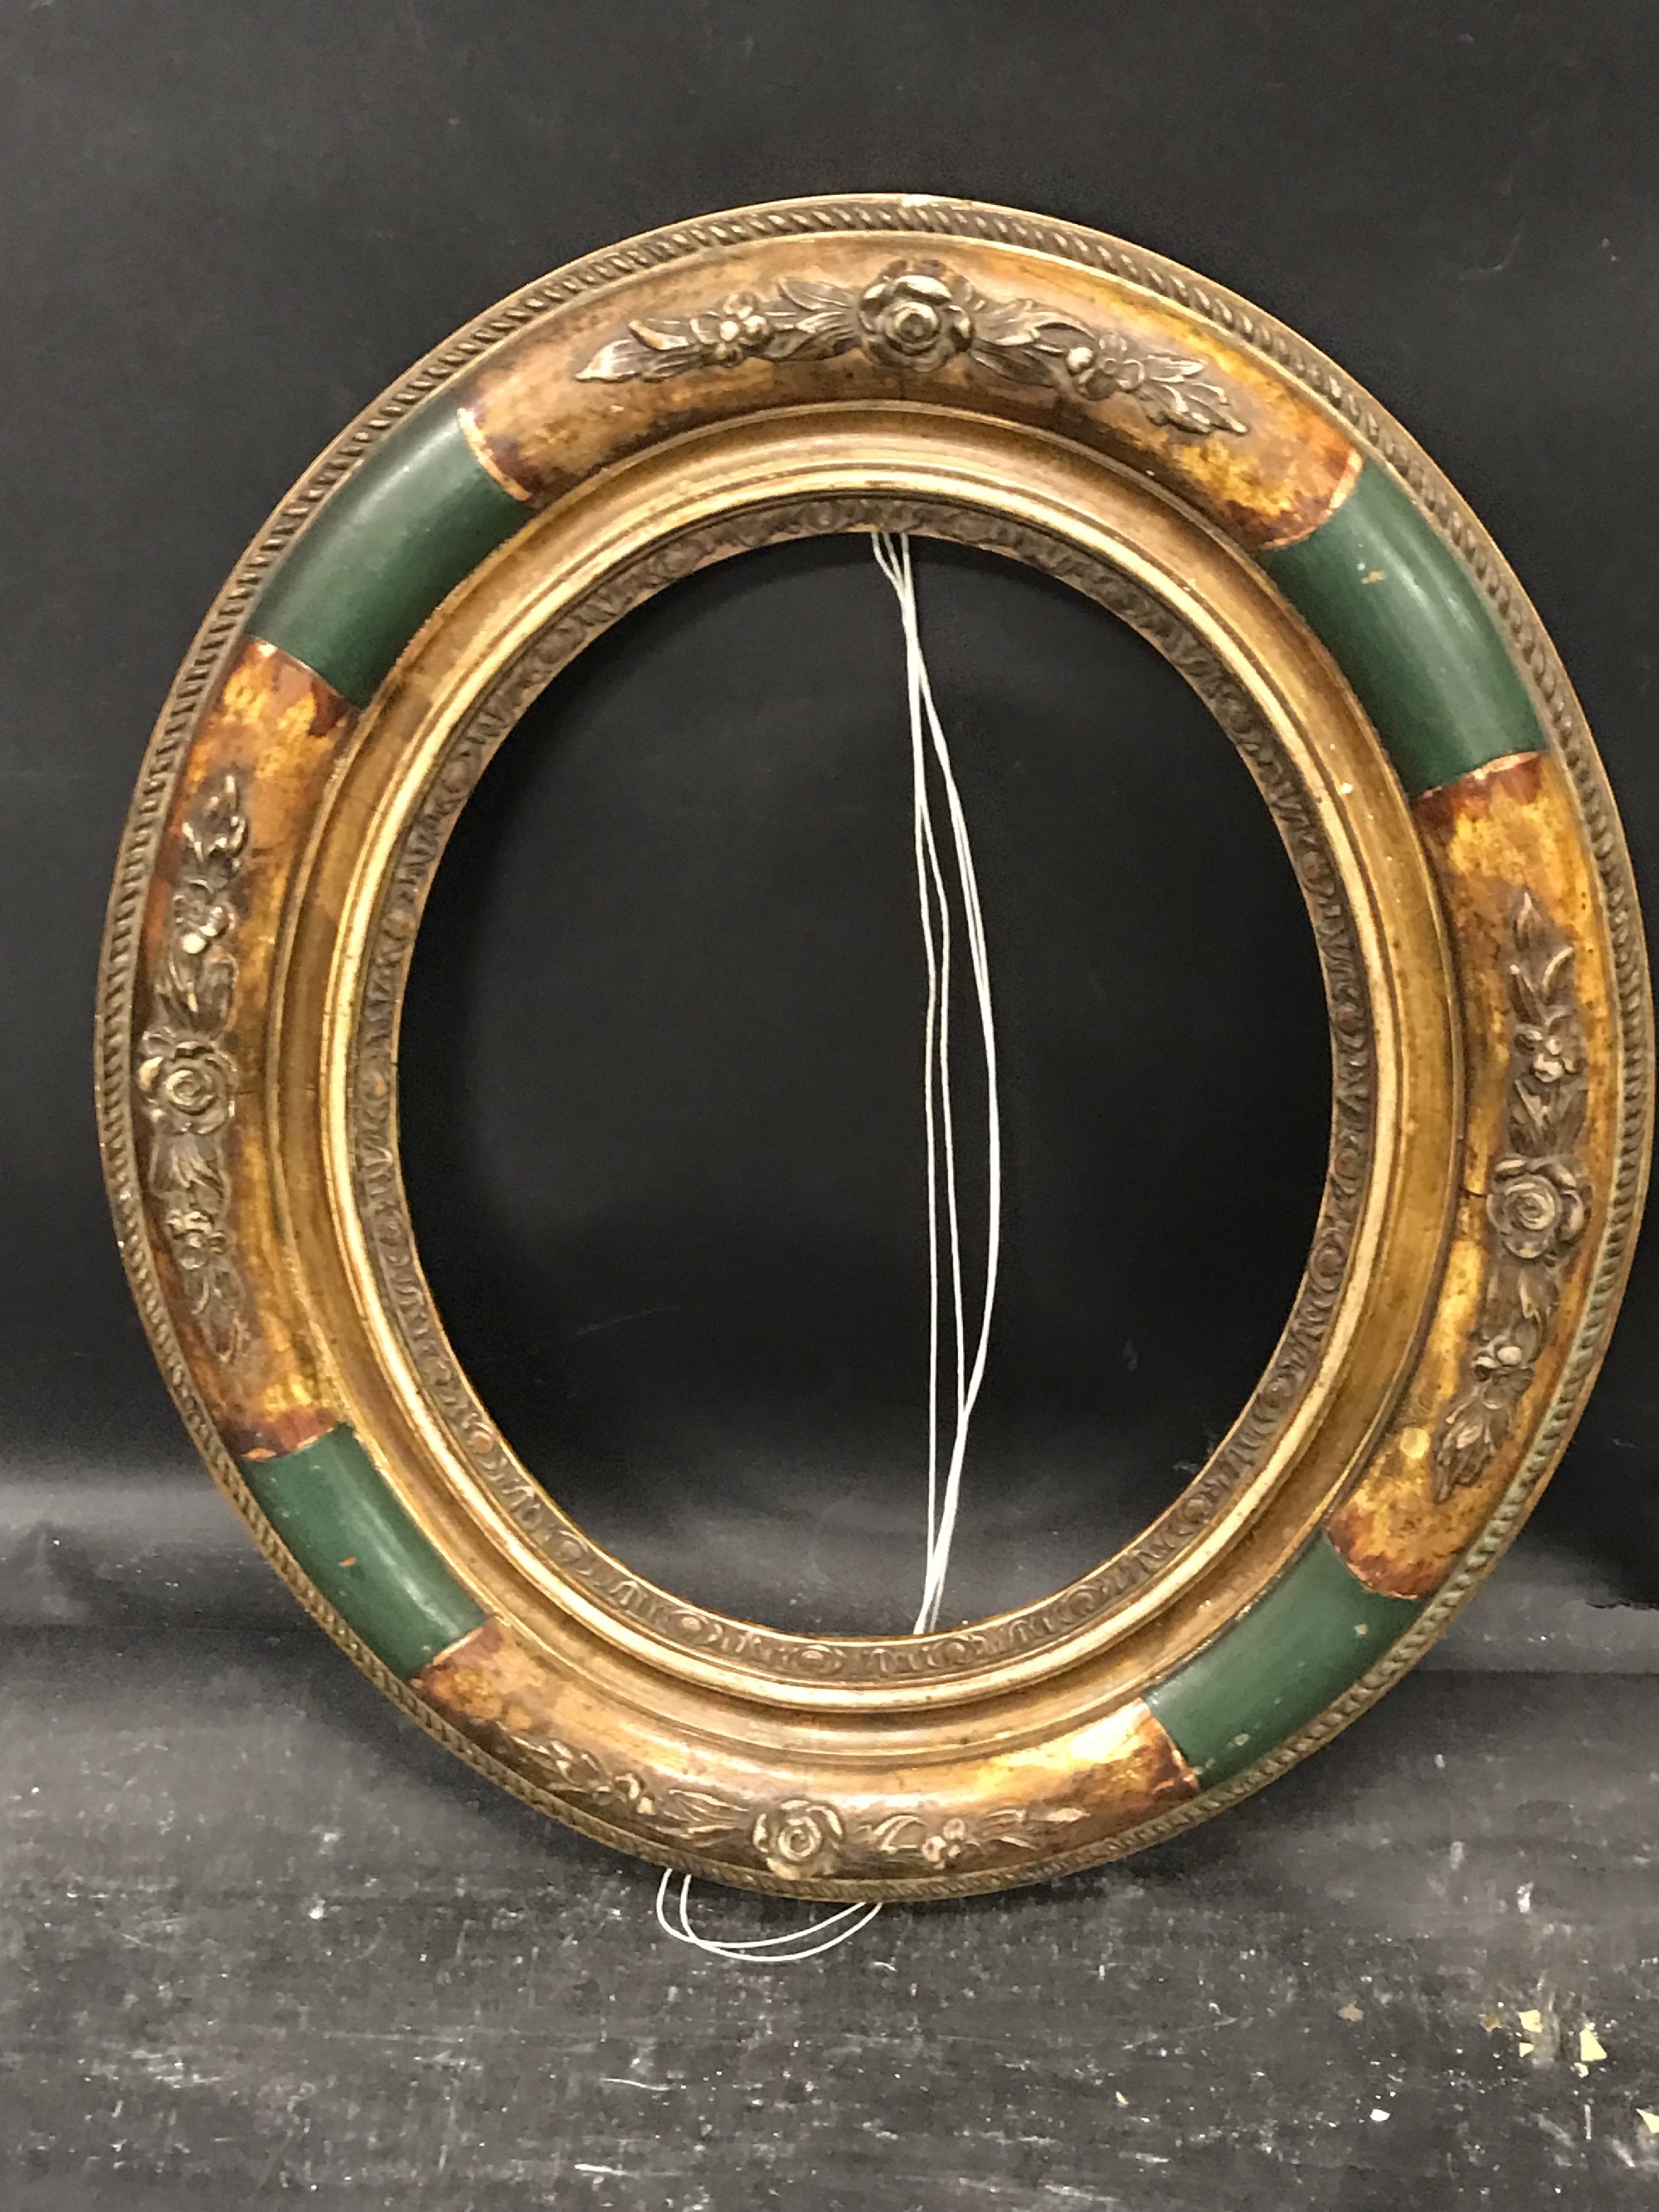 19th Century English School. A Gilt and Green Painted Composition Frame, Oval, 10.5" x 8.5". - Image 2 of 3